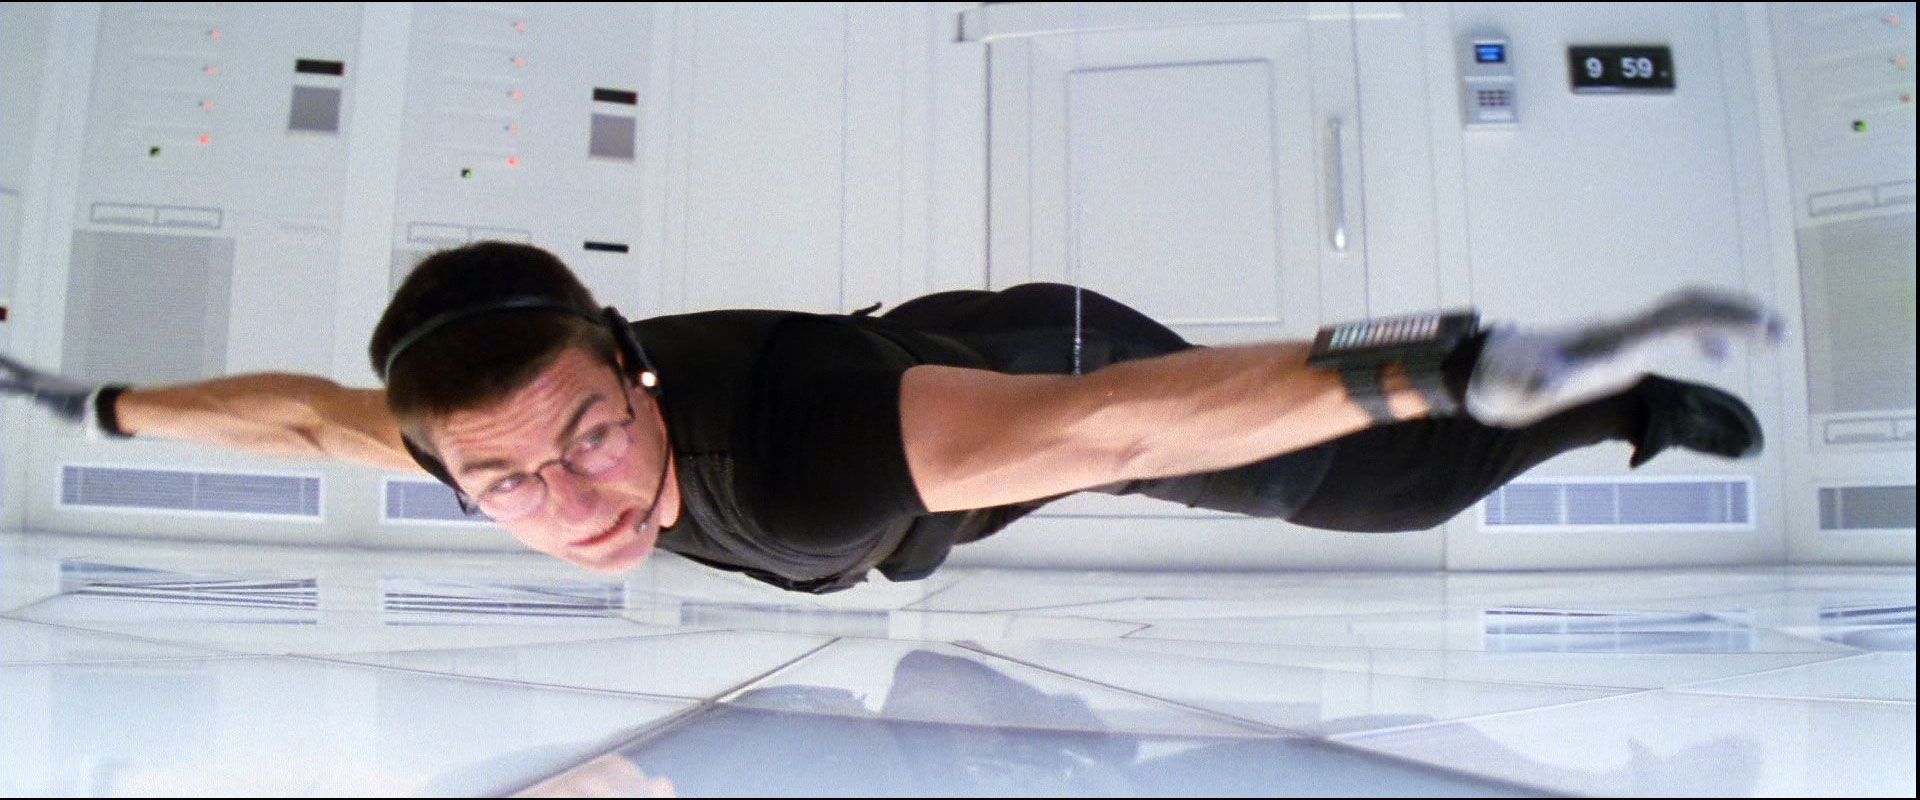 Mission: Impossible #4